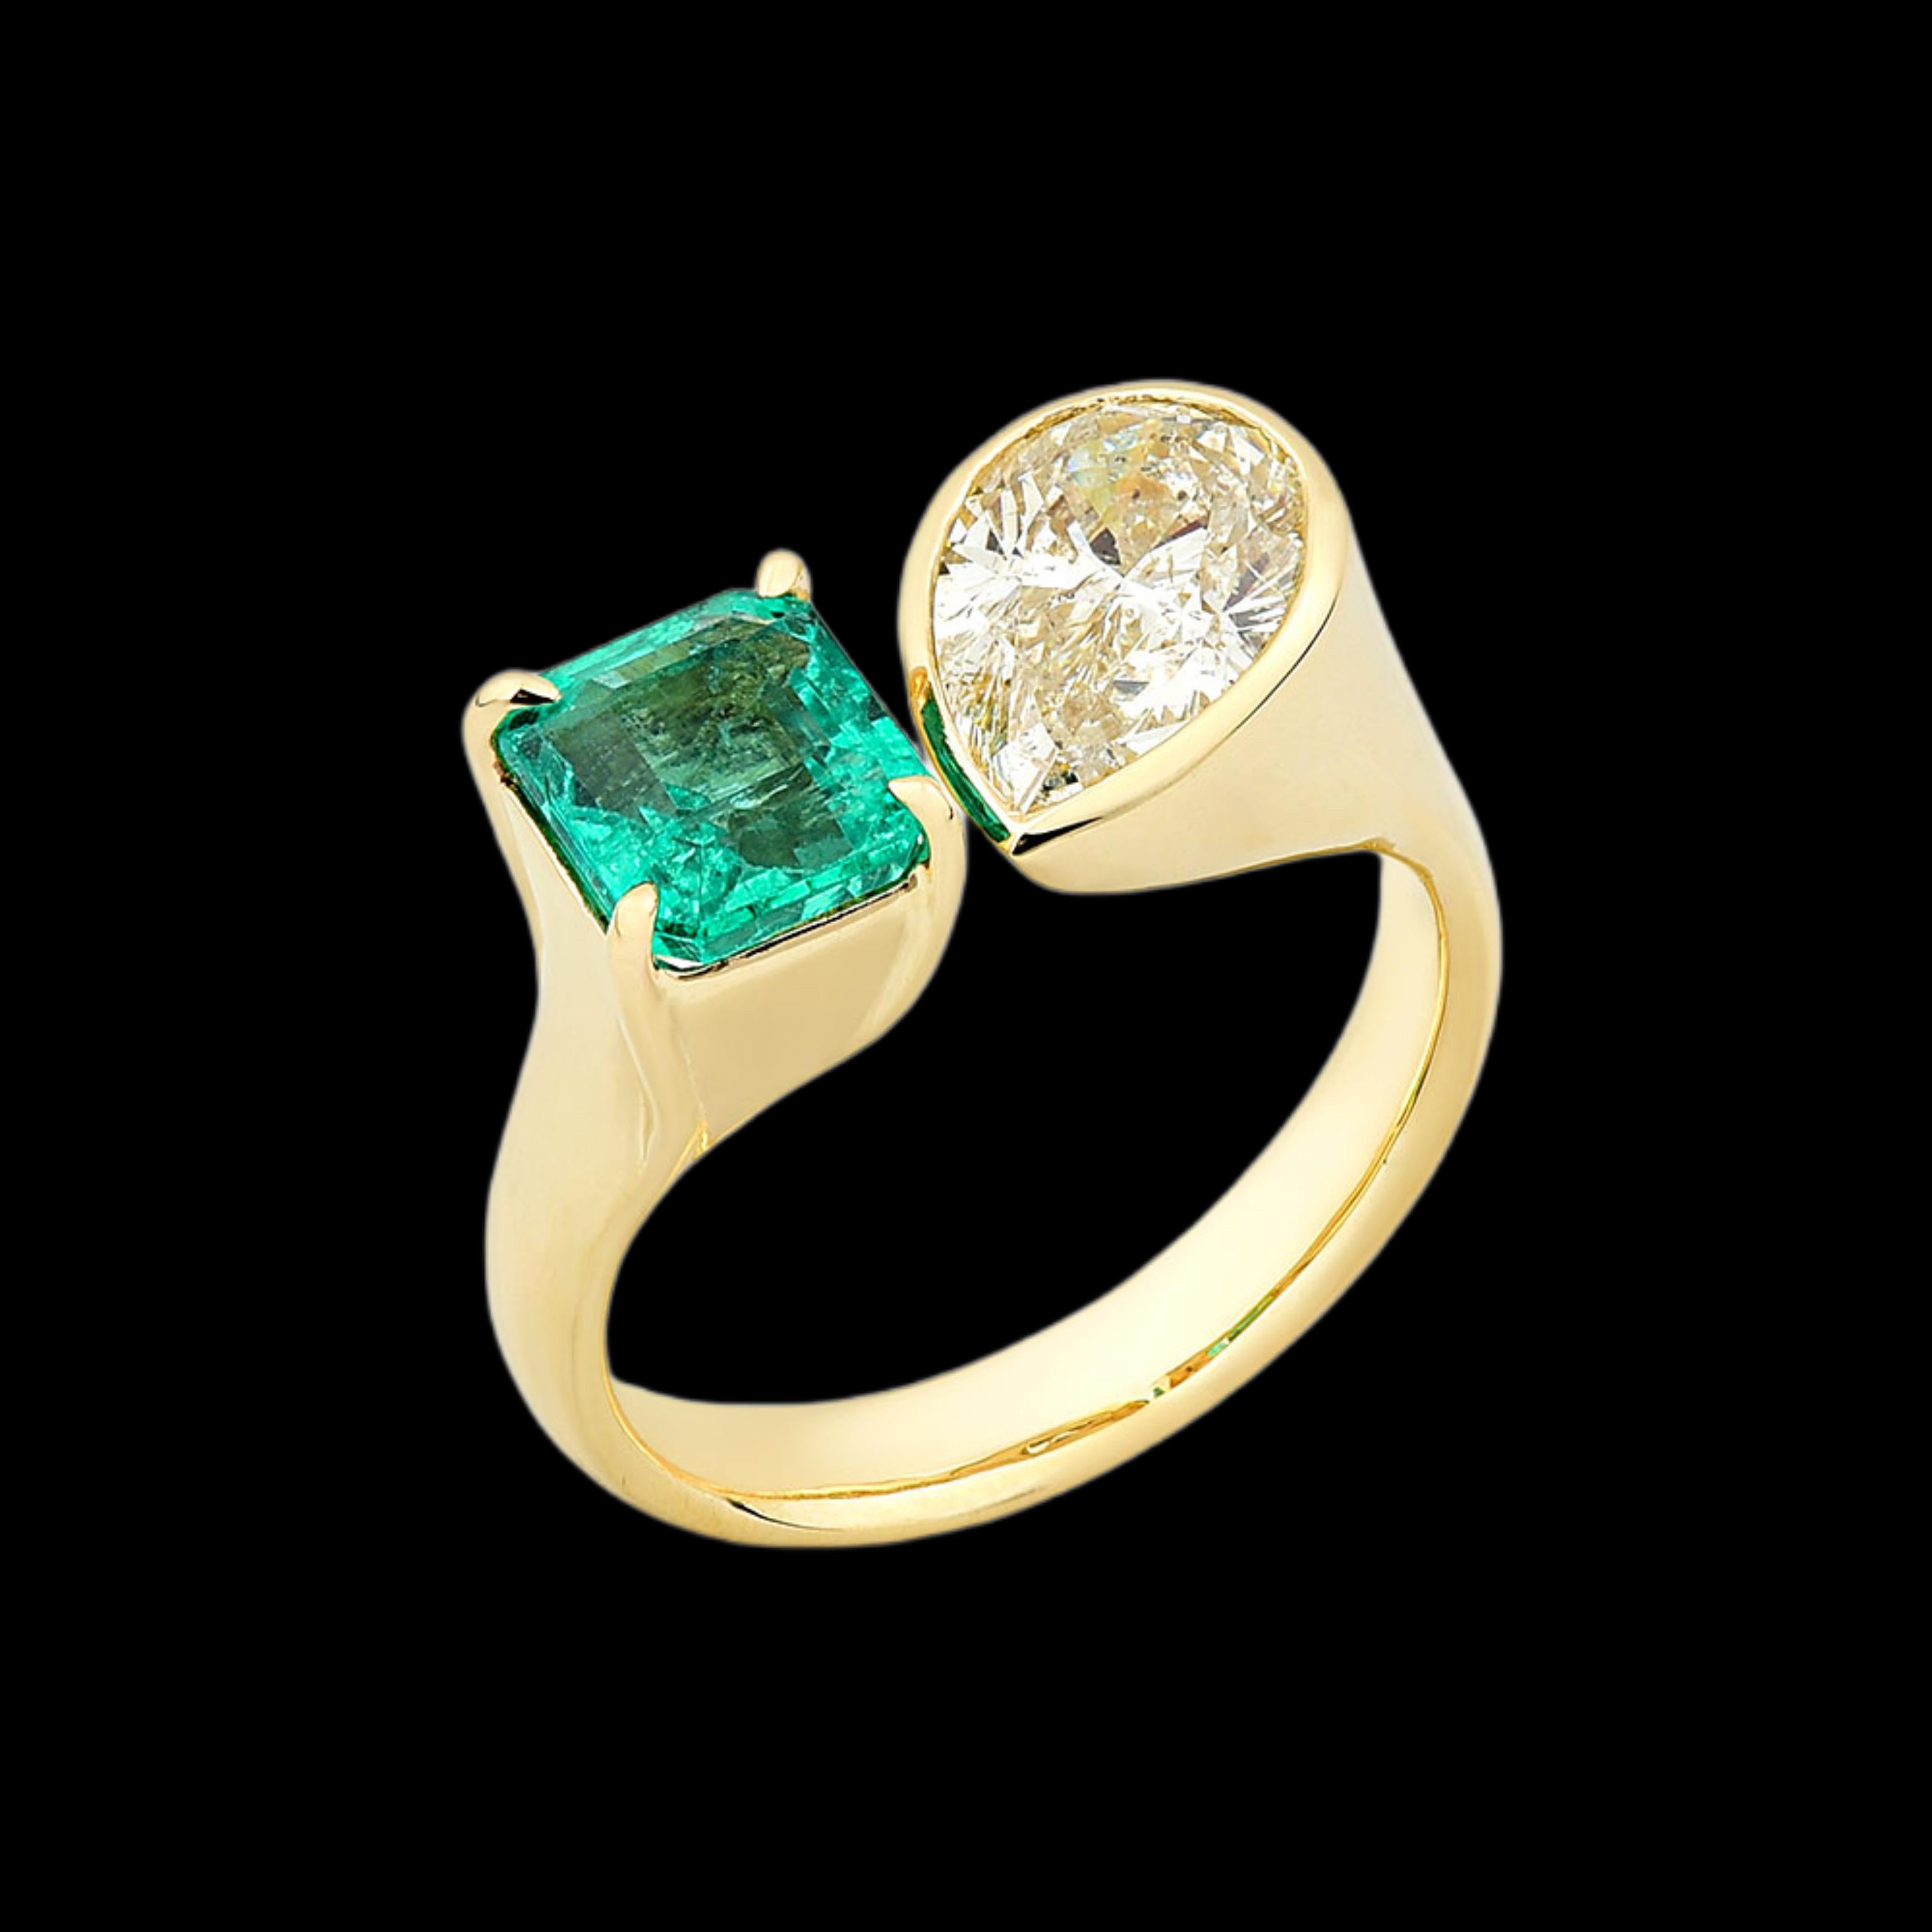 For Sale:  14K Yellow Gold, Pear Shape Diamond and Princess Cut Emerald Ring 2